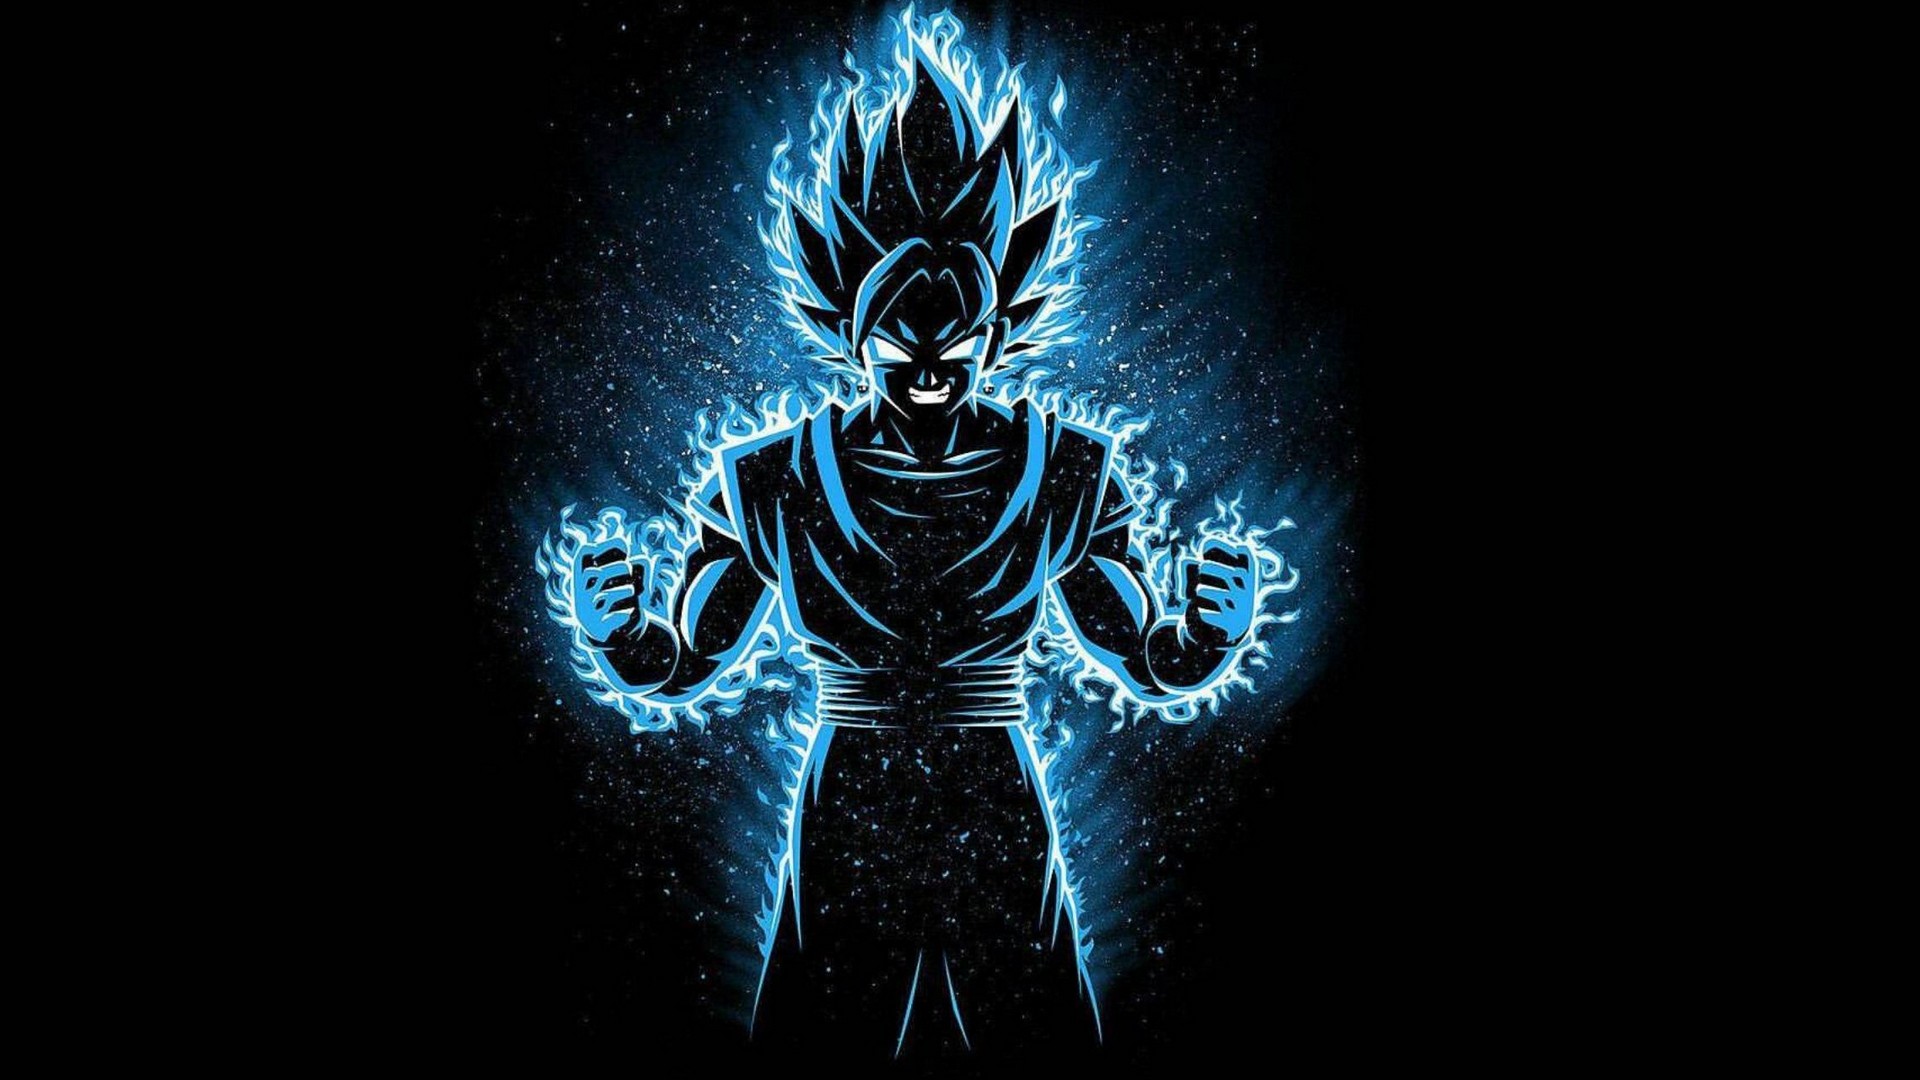 Black Goku Desktop Backgrounds with image resolution 1920x1080 pixel. You can make this wallpaper for your Desktop Computer Backgrounds, Mac Wallpapers, Android Lock screen or iPhone Screensavers